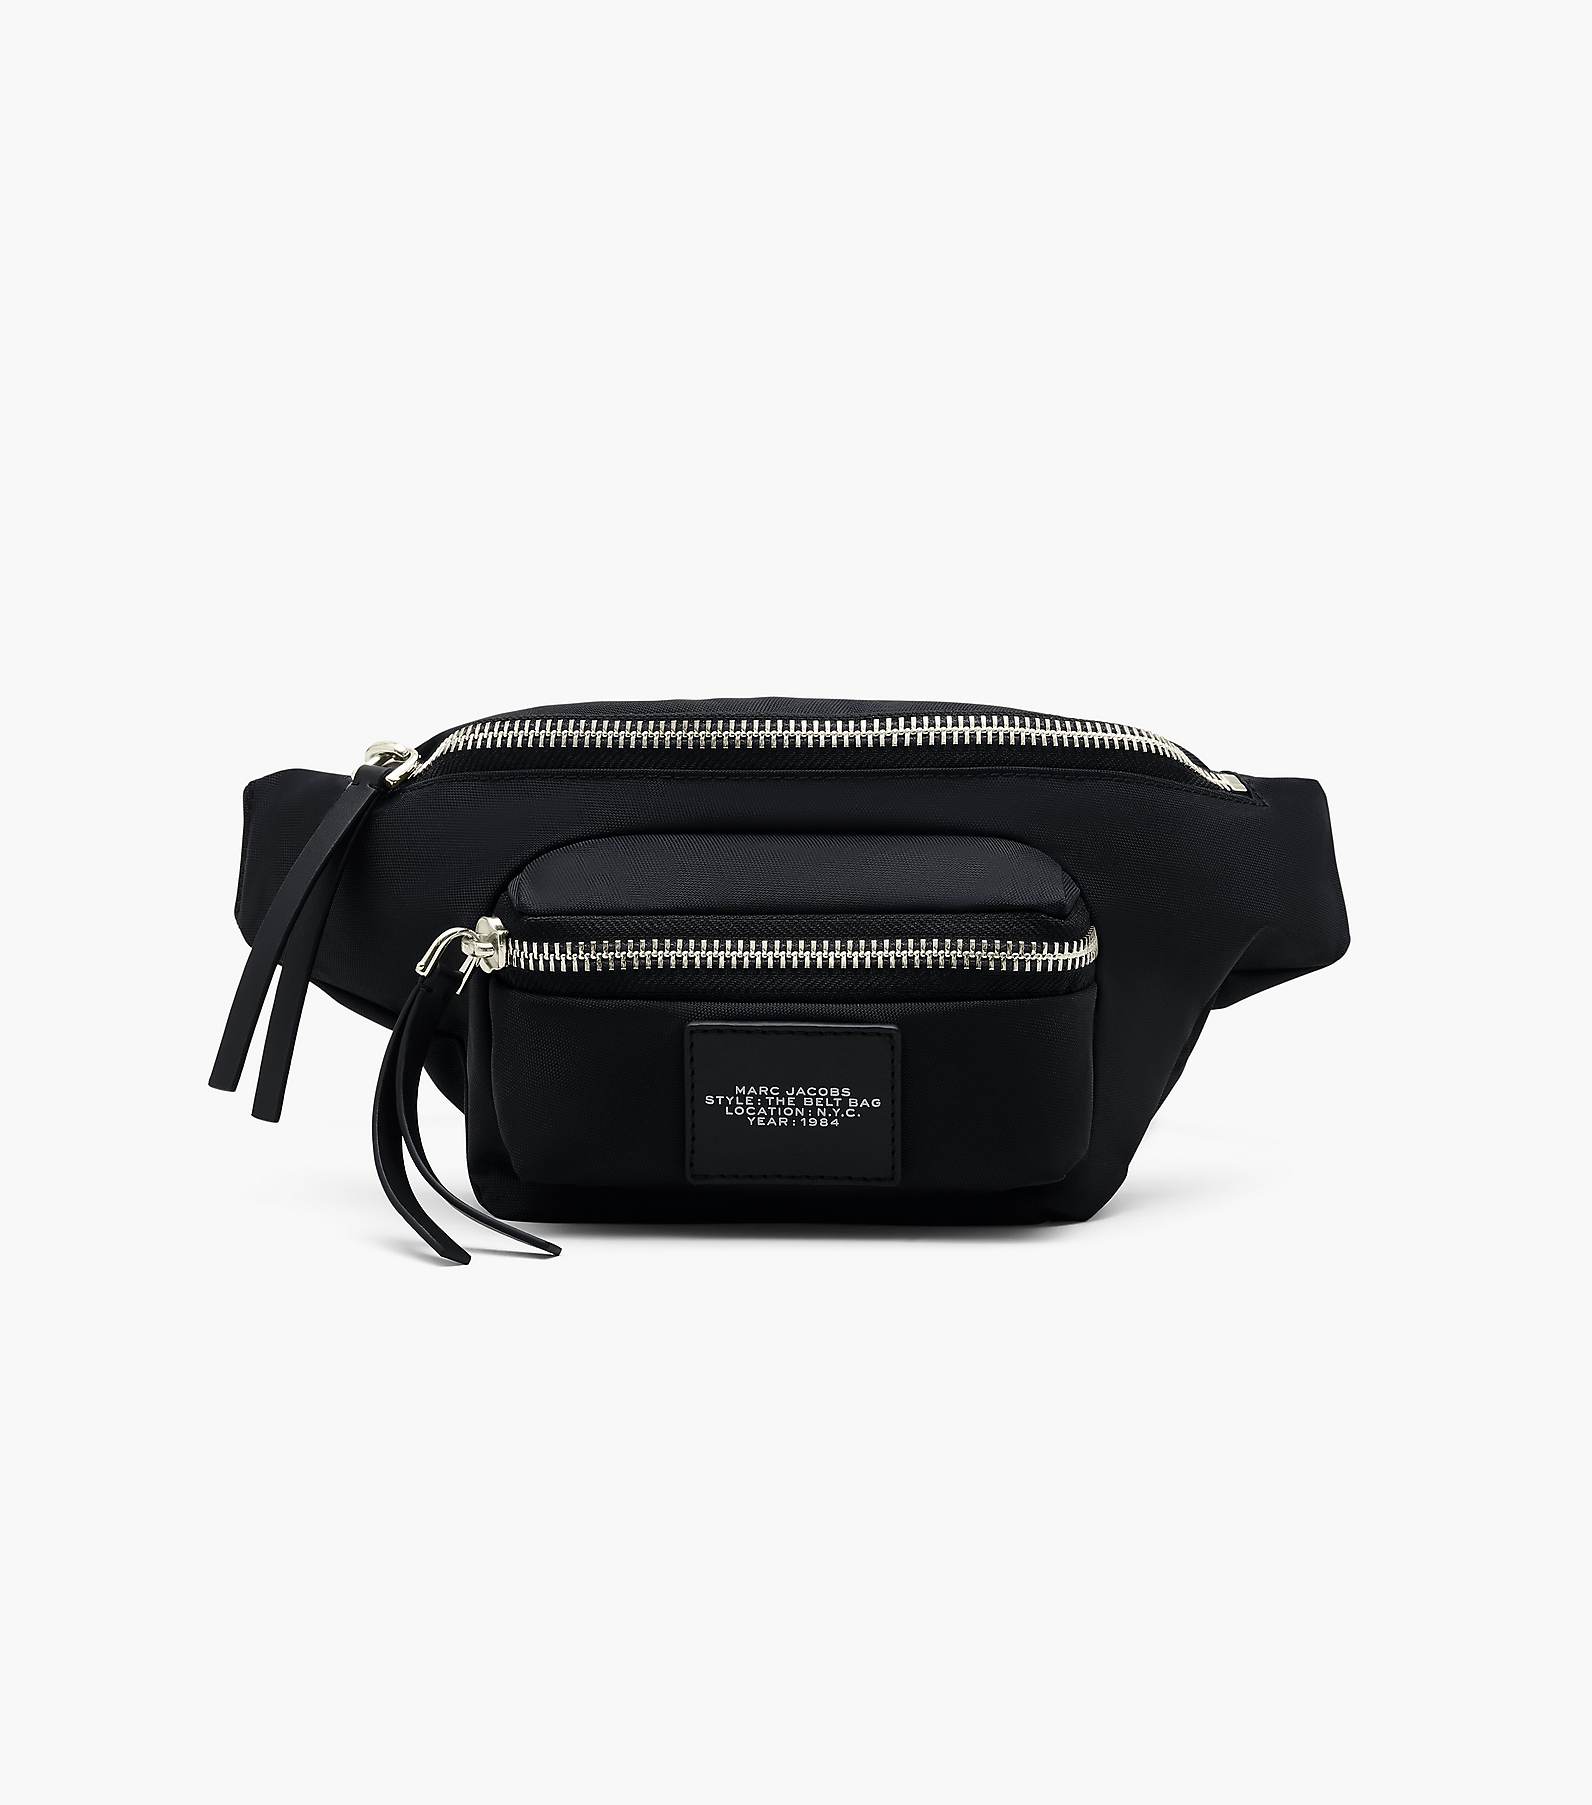 Soft Cases/Pouches in Black by  | Belt Clip Pouch